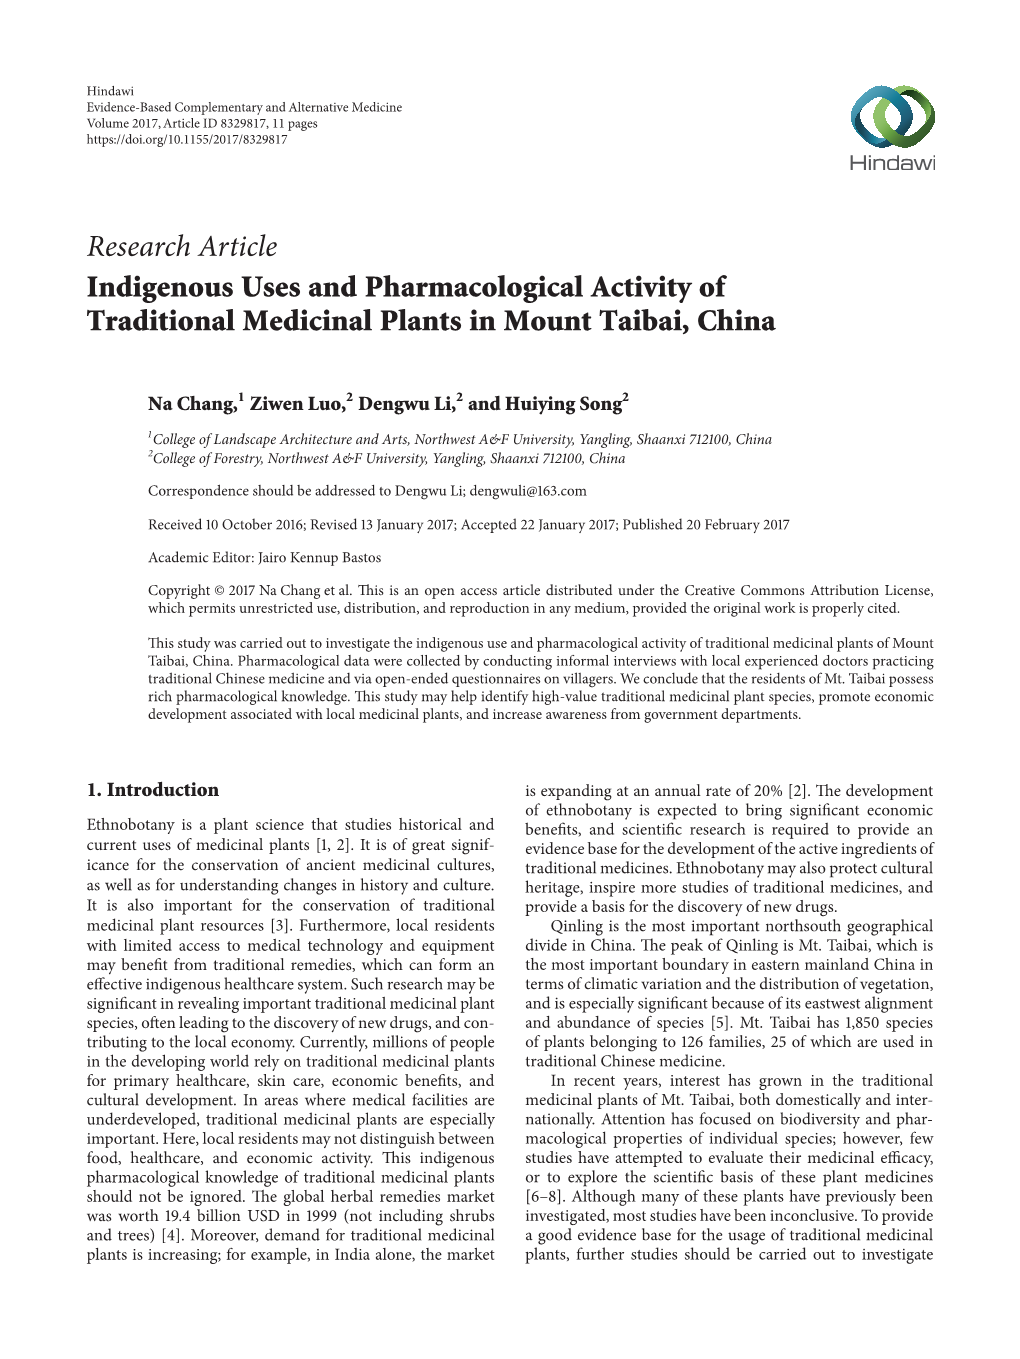 Indigenous Uses and Pharmacological Activity of Traditional Medicinal Plants in Mount Taibai, China